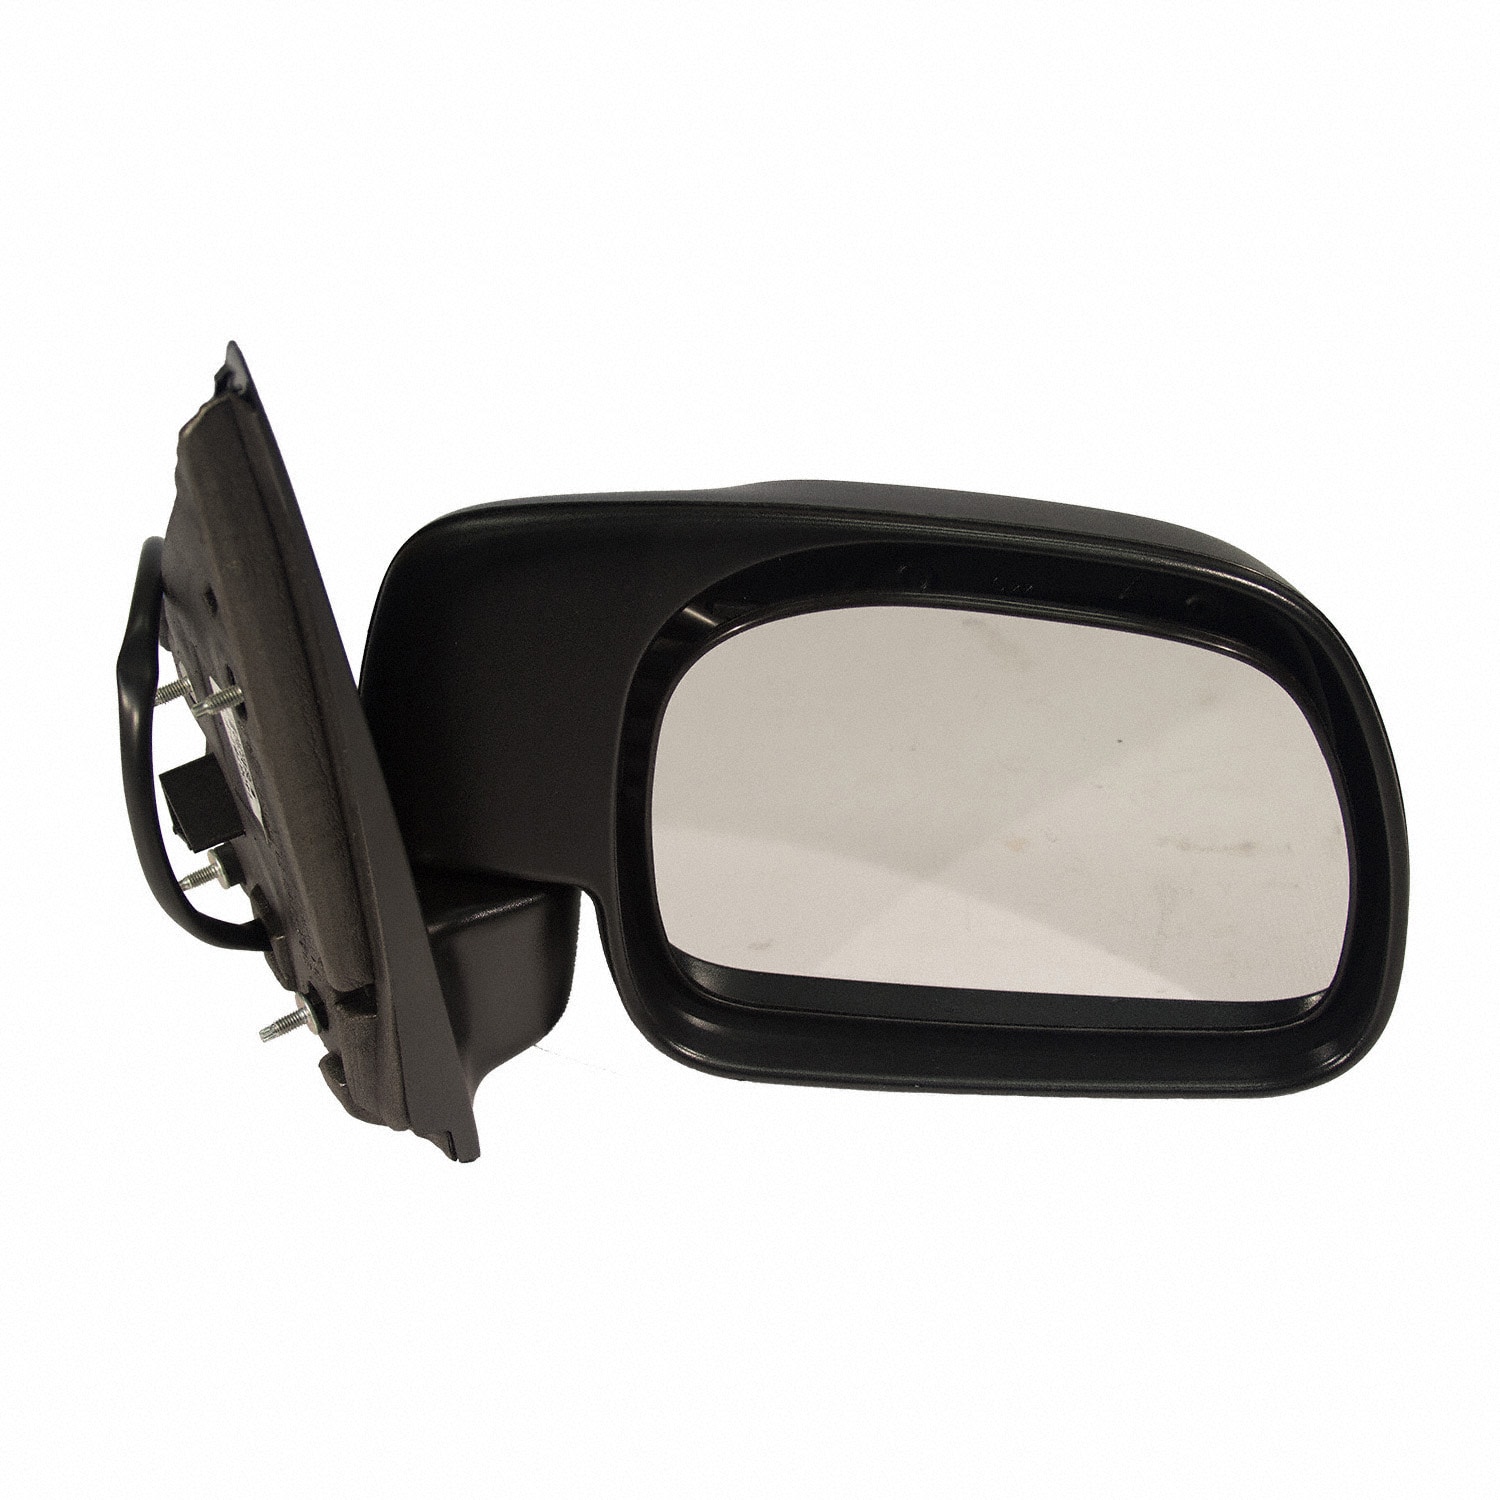 Ford® and Lincoln® Mirror Parts : FordParts.com